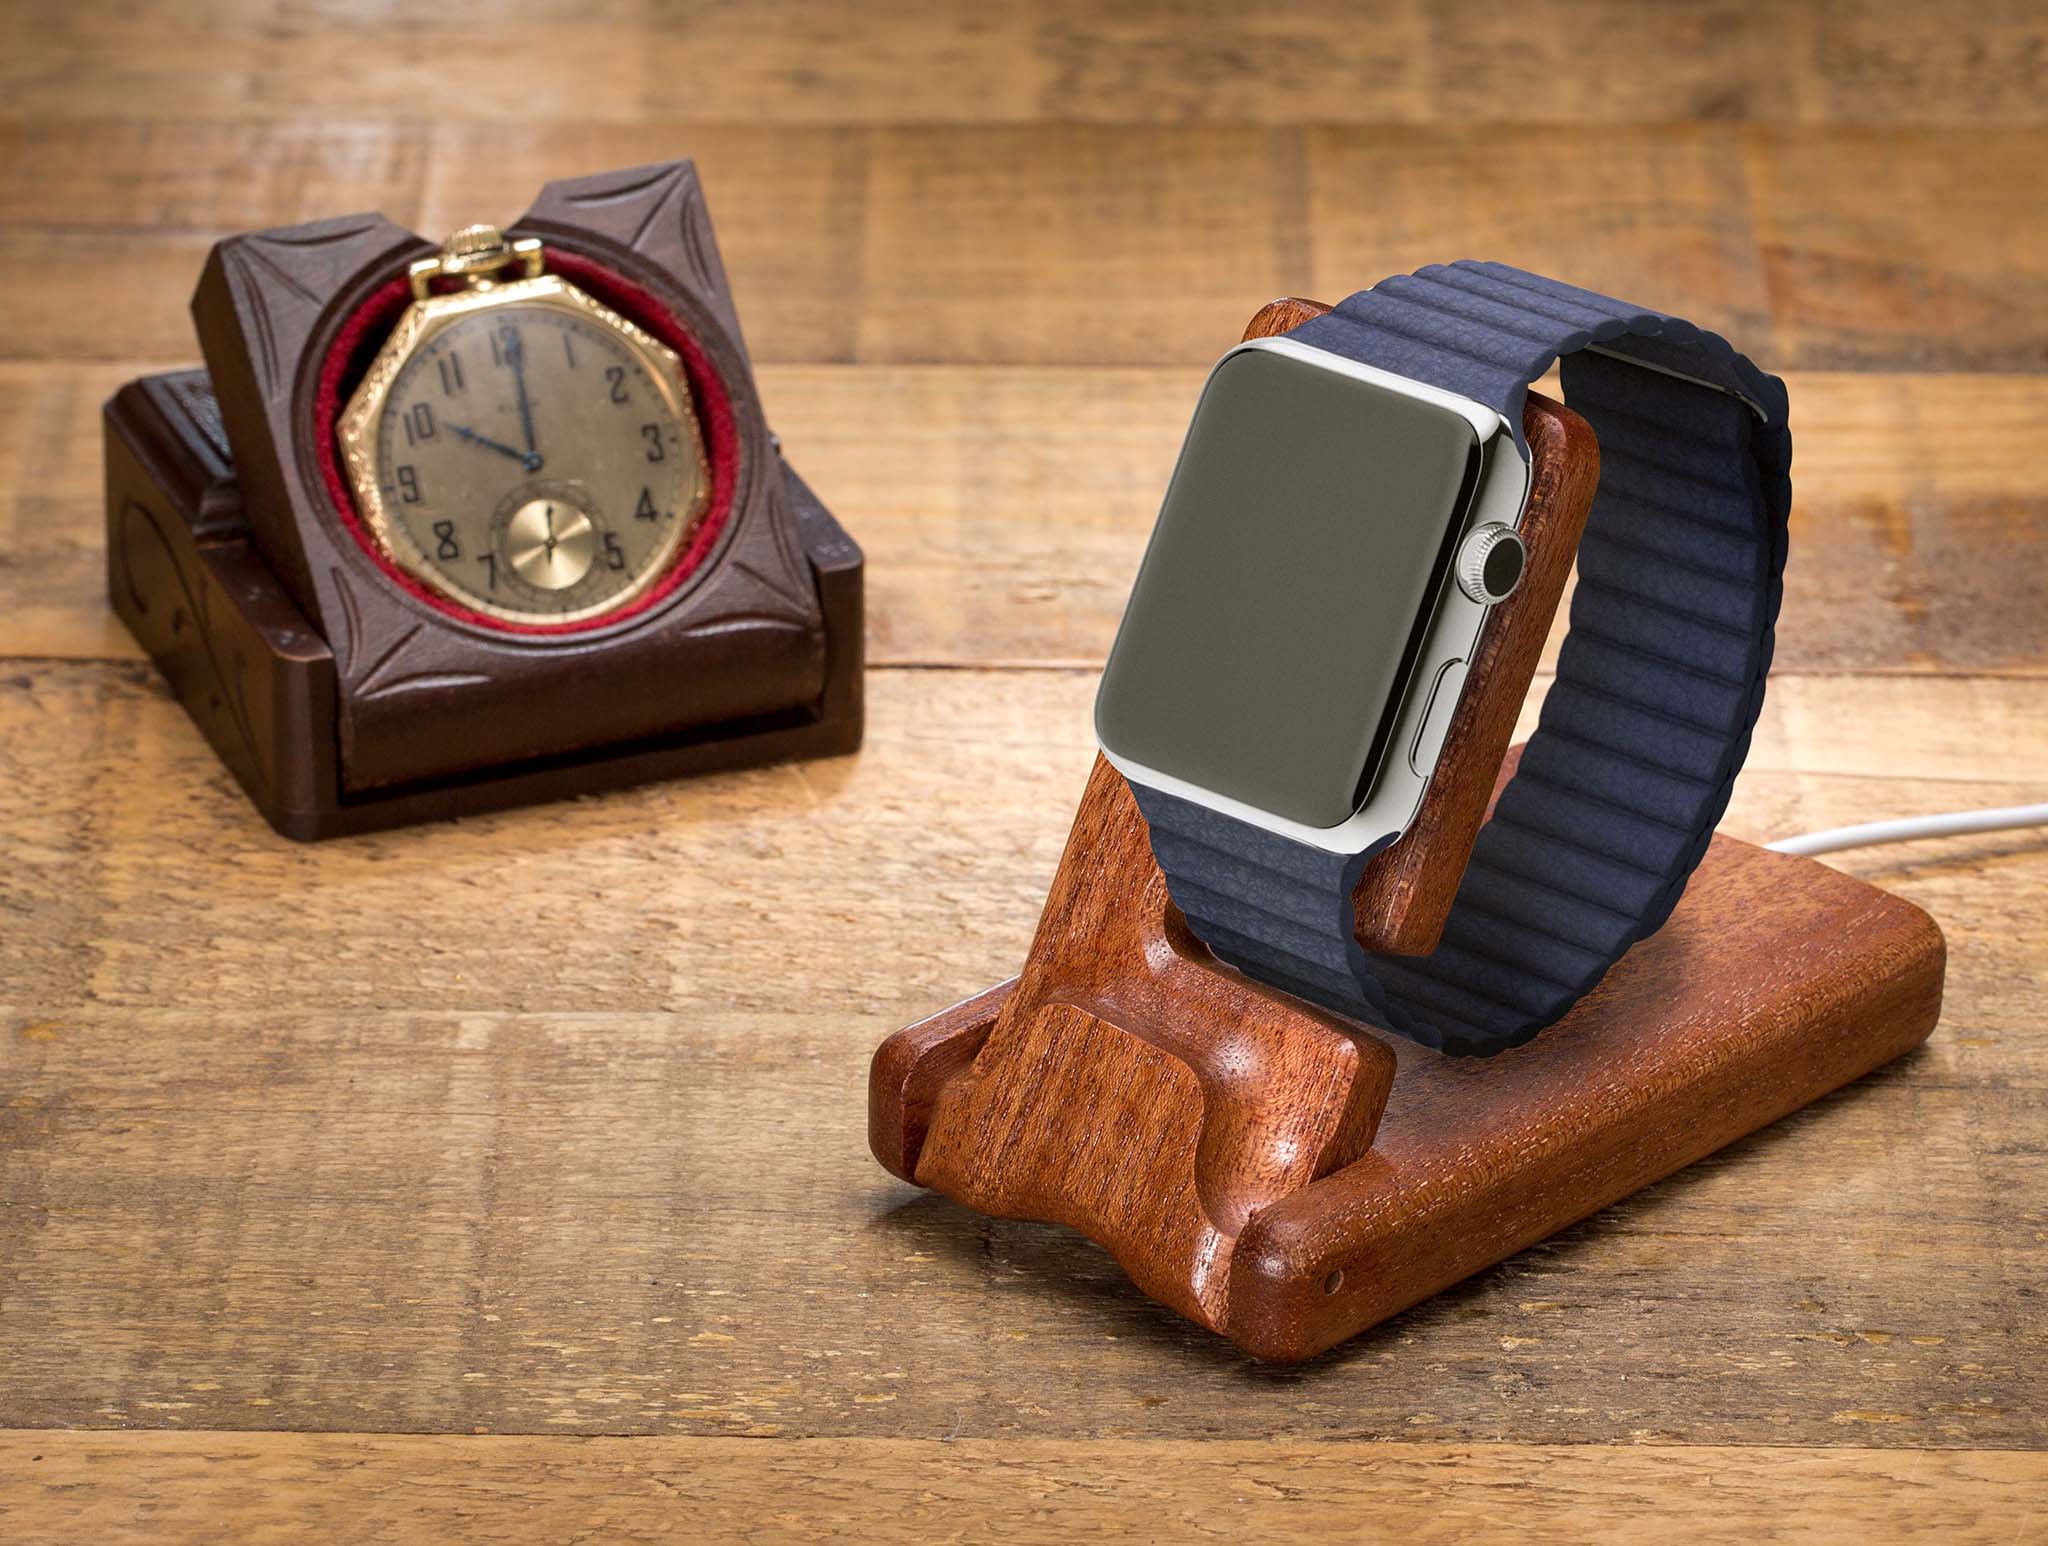 Pad & Quill watch stands